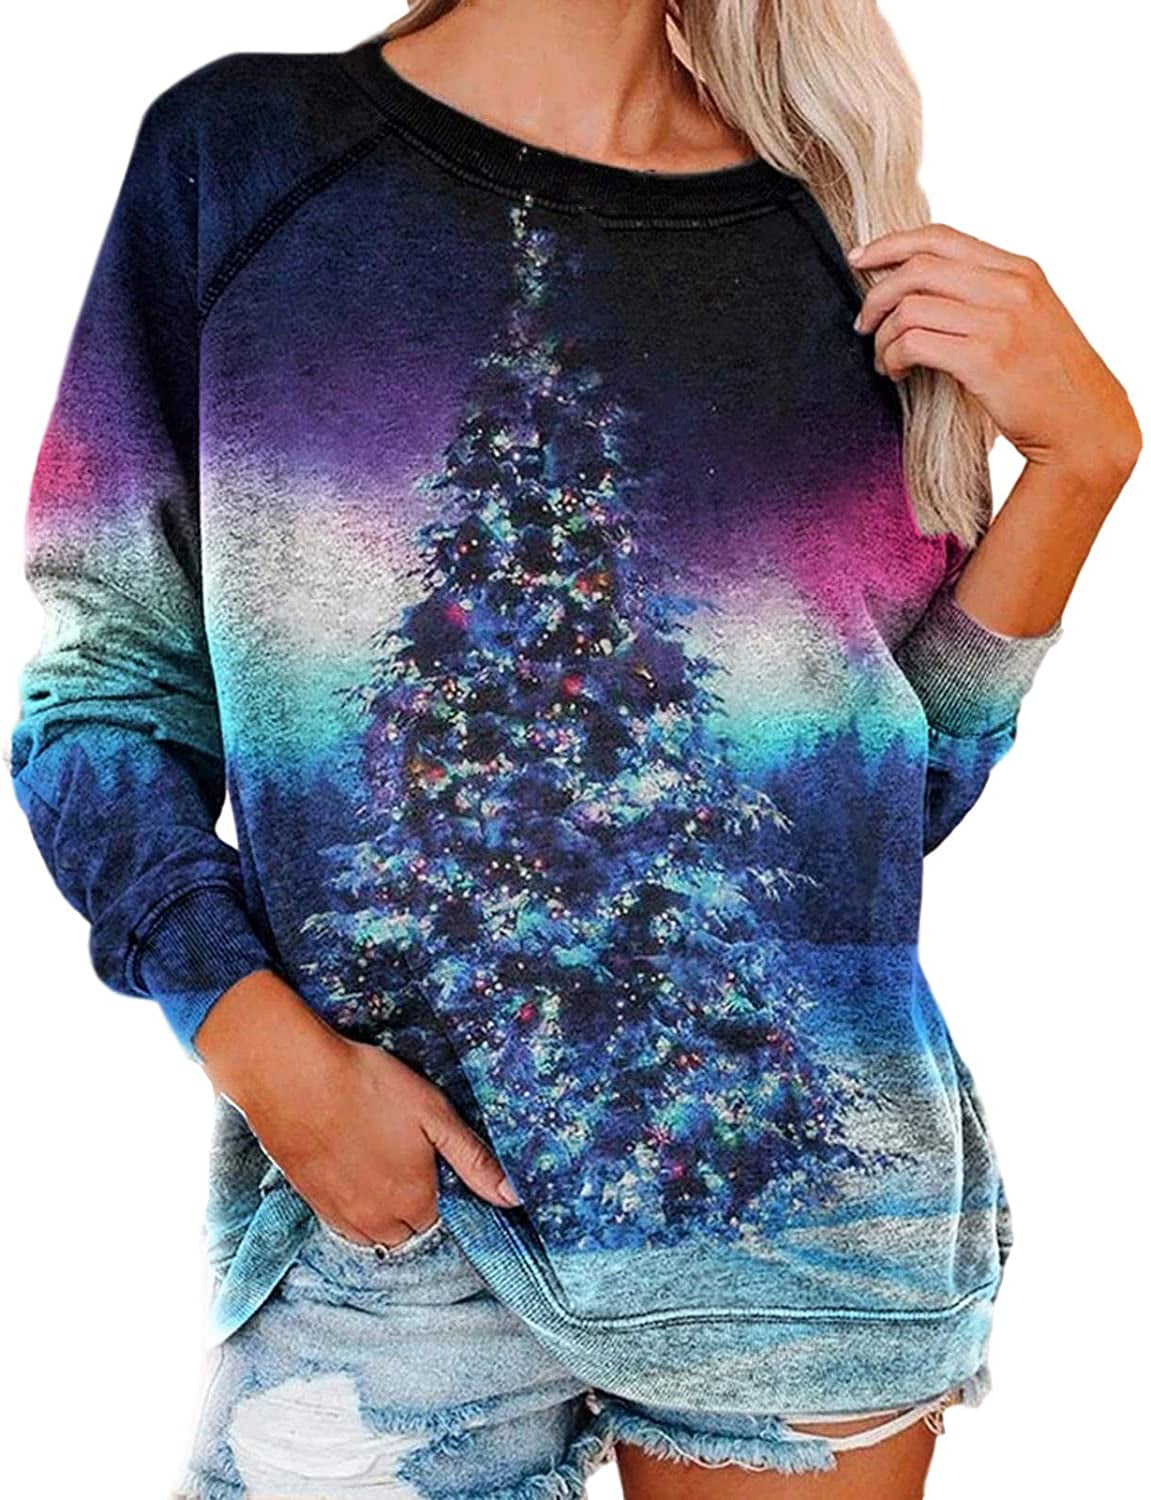 Christmas Tops for Women Sequined Shirts Crewneck Tunic Tops Long Sleeve Pullover Tops Lightweight Sweatshirt 